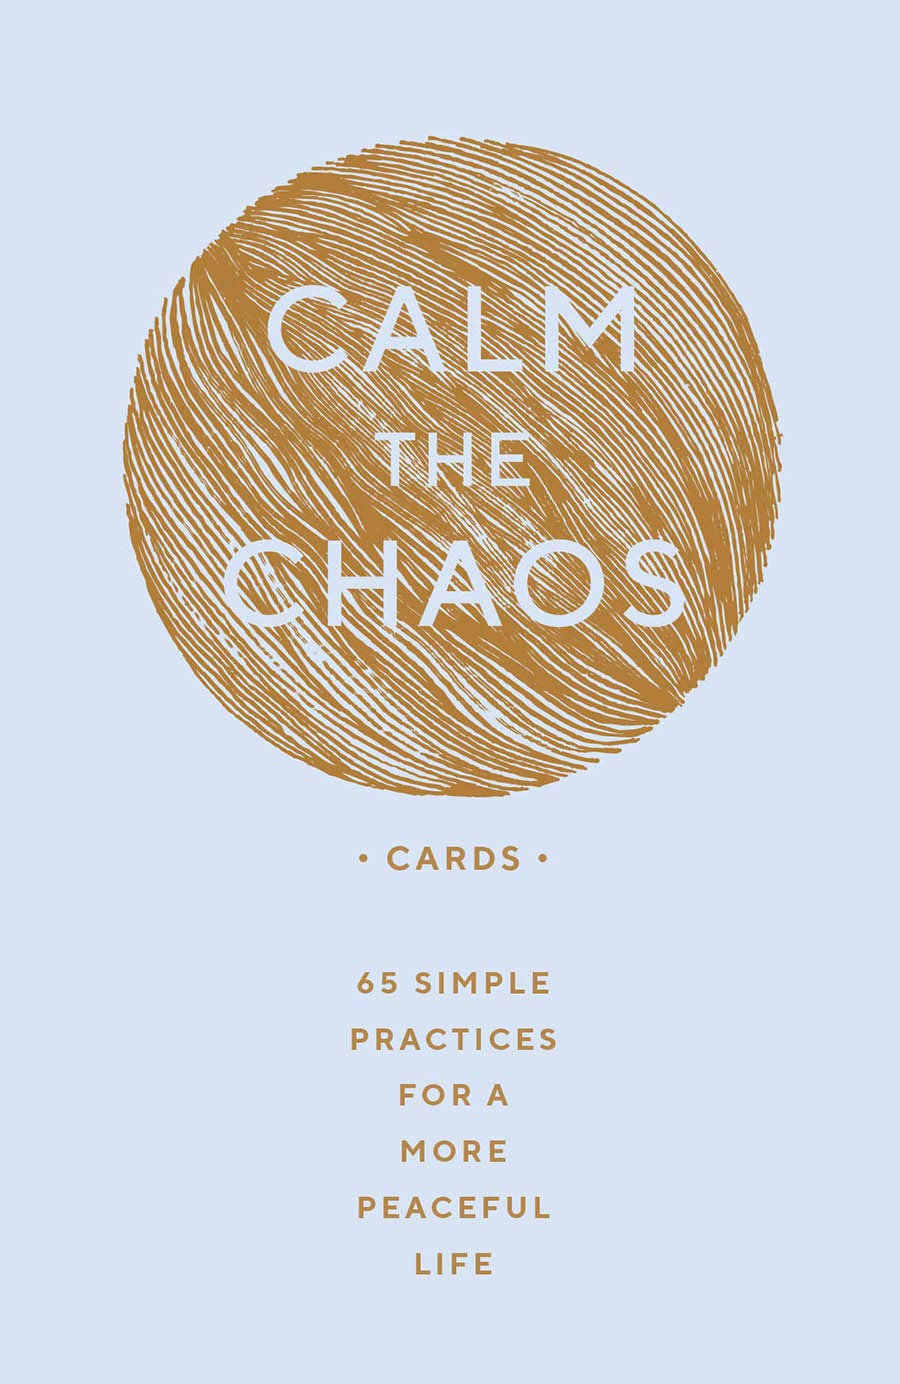 Calm Chaos Cards: 65 Simple Practices